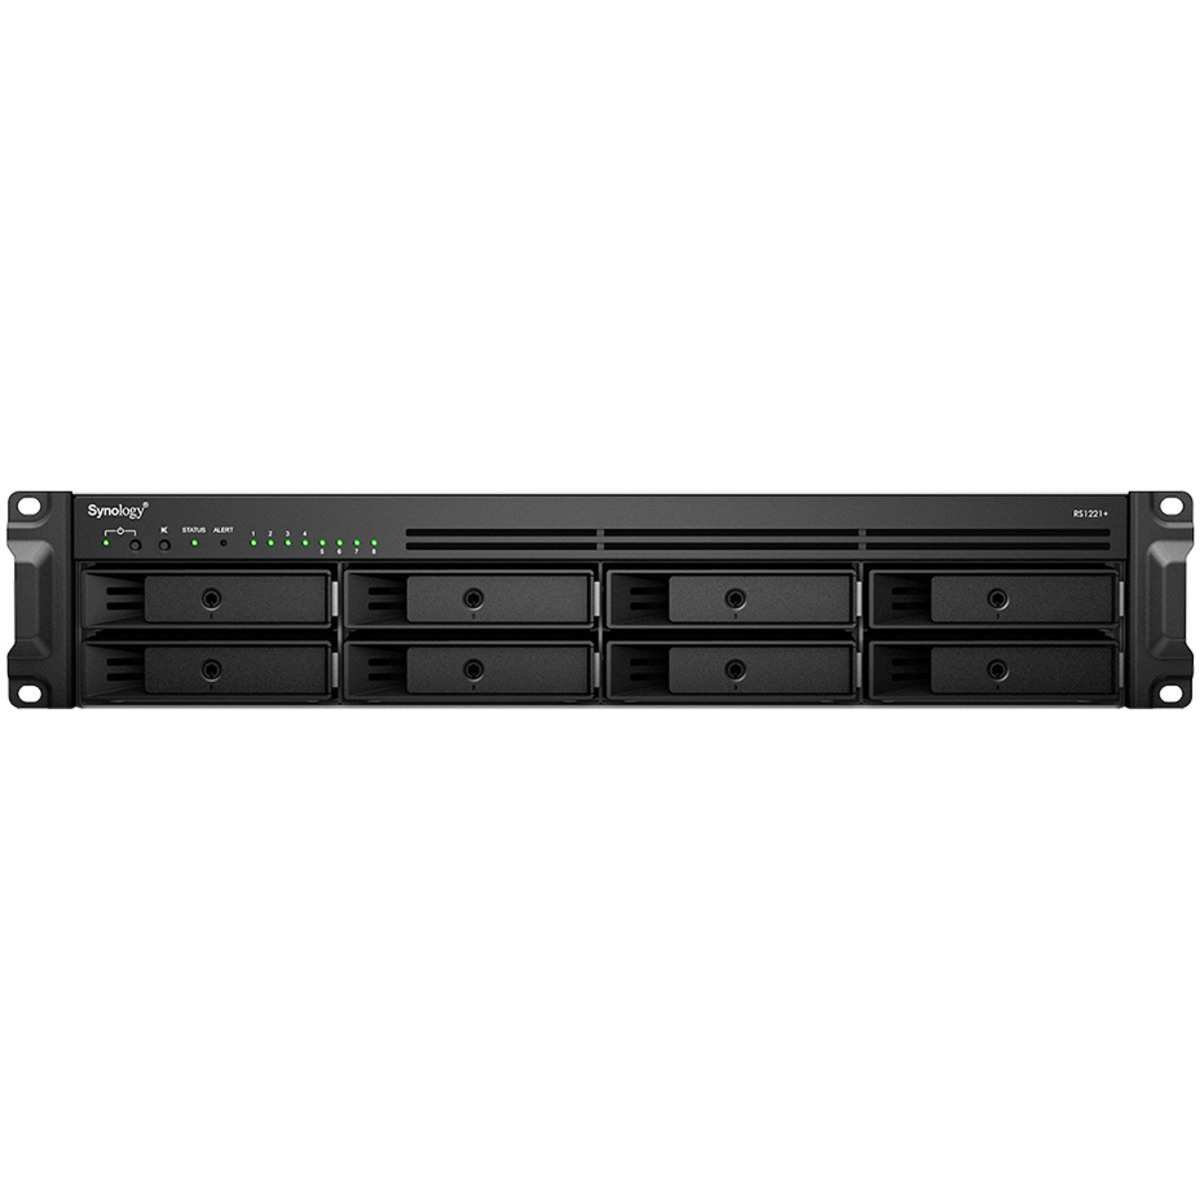 Synology RackStation RS1221RP+ 96tb 8-Bay RackMount Multimedia / Power User / Business NAS - Network Attached Storage Device 8x12tb Synology Plus Series HAT3310-12T 3.5 7200rpm SATA 6Gb/s HDD NAS Class Drives Installed - Burn-In Tested - FREE RAM UPGRADE RackStation RS1221RP+